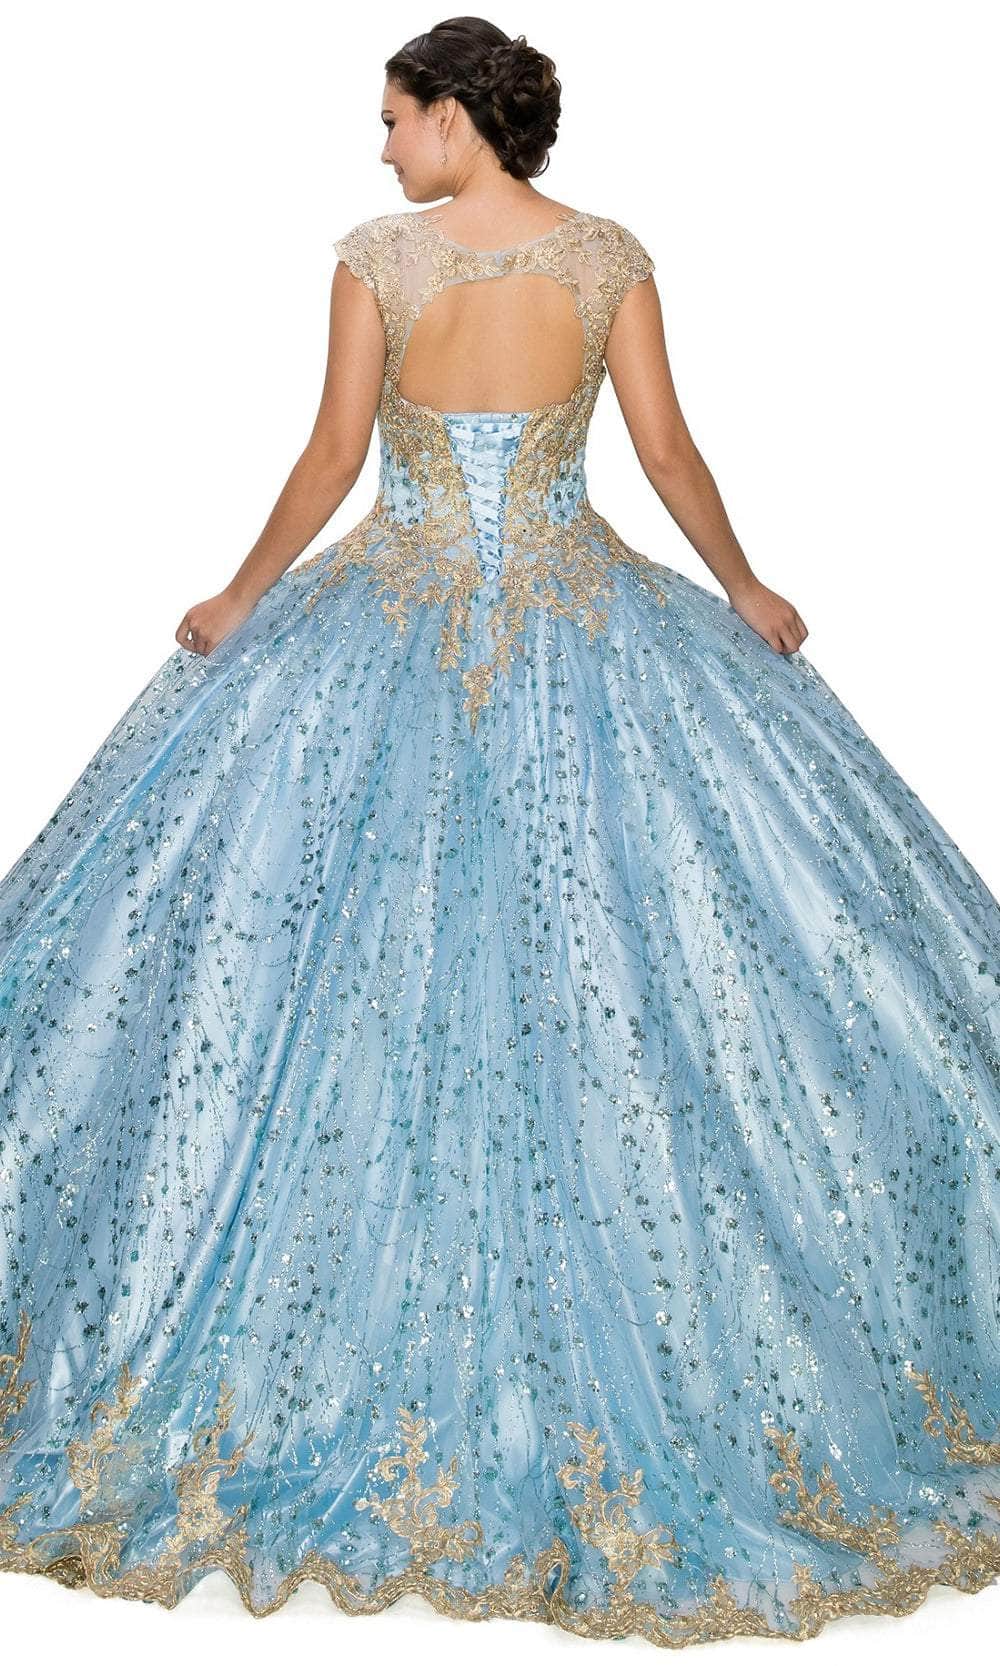 Cinderella Couture 8024J - Cutout Back Embellished Ballgown Special Occasion Dress